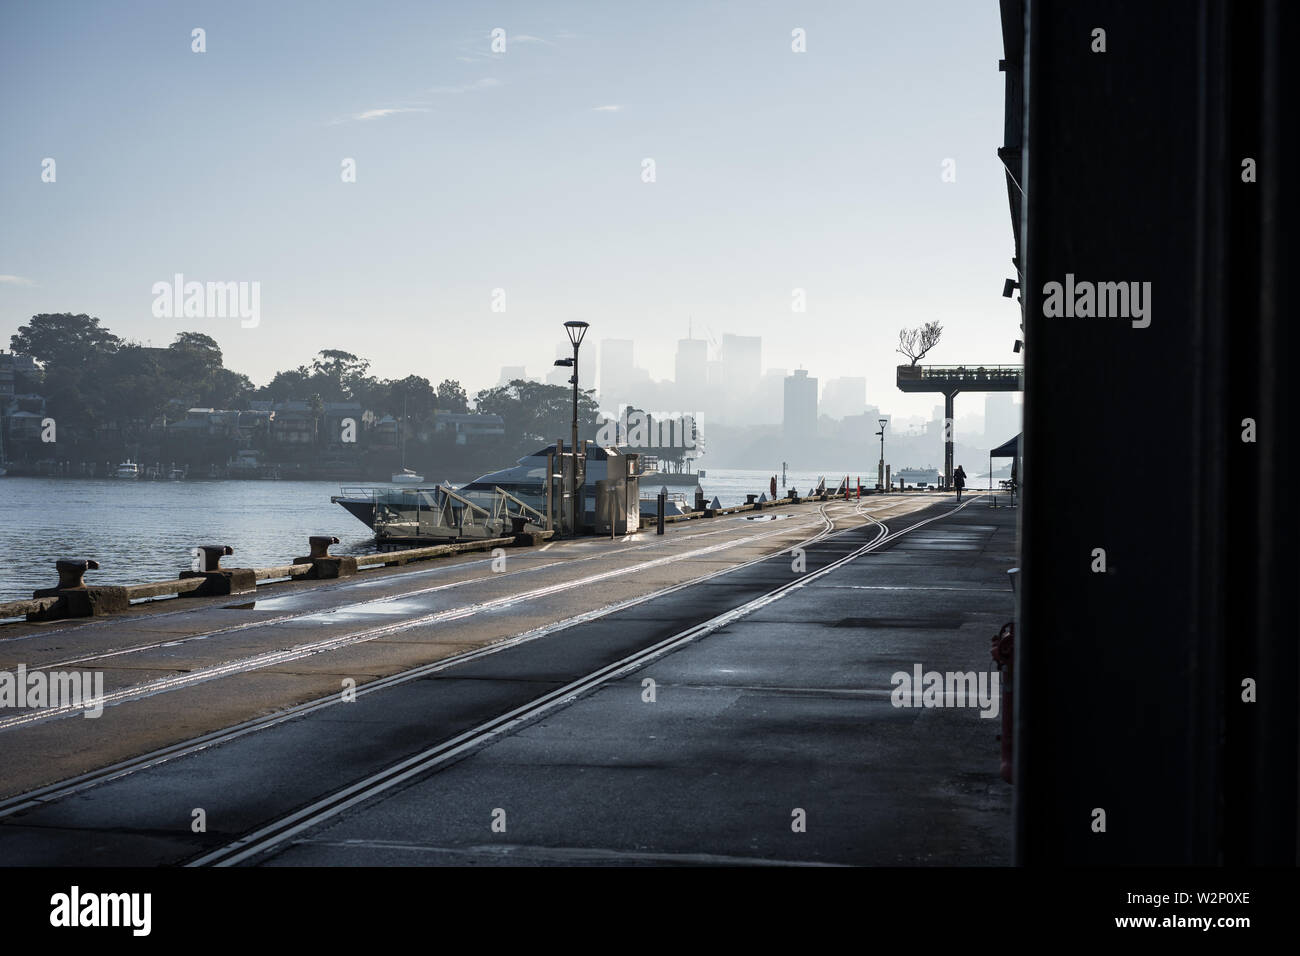 Urbanscape at Jones Bay Wharf. North Sydney visible in the through the early morning haze in the background. Sydney NSW. June 2019 Stock Photo